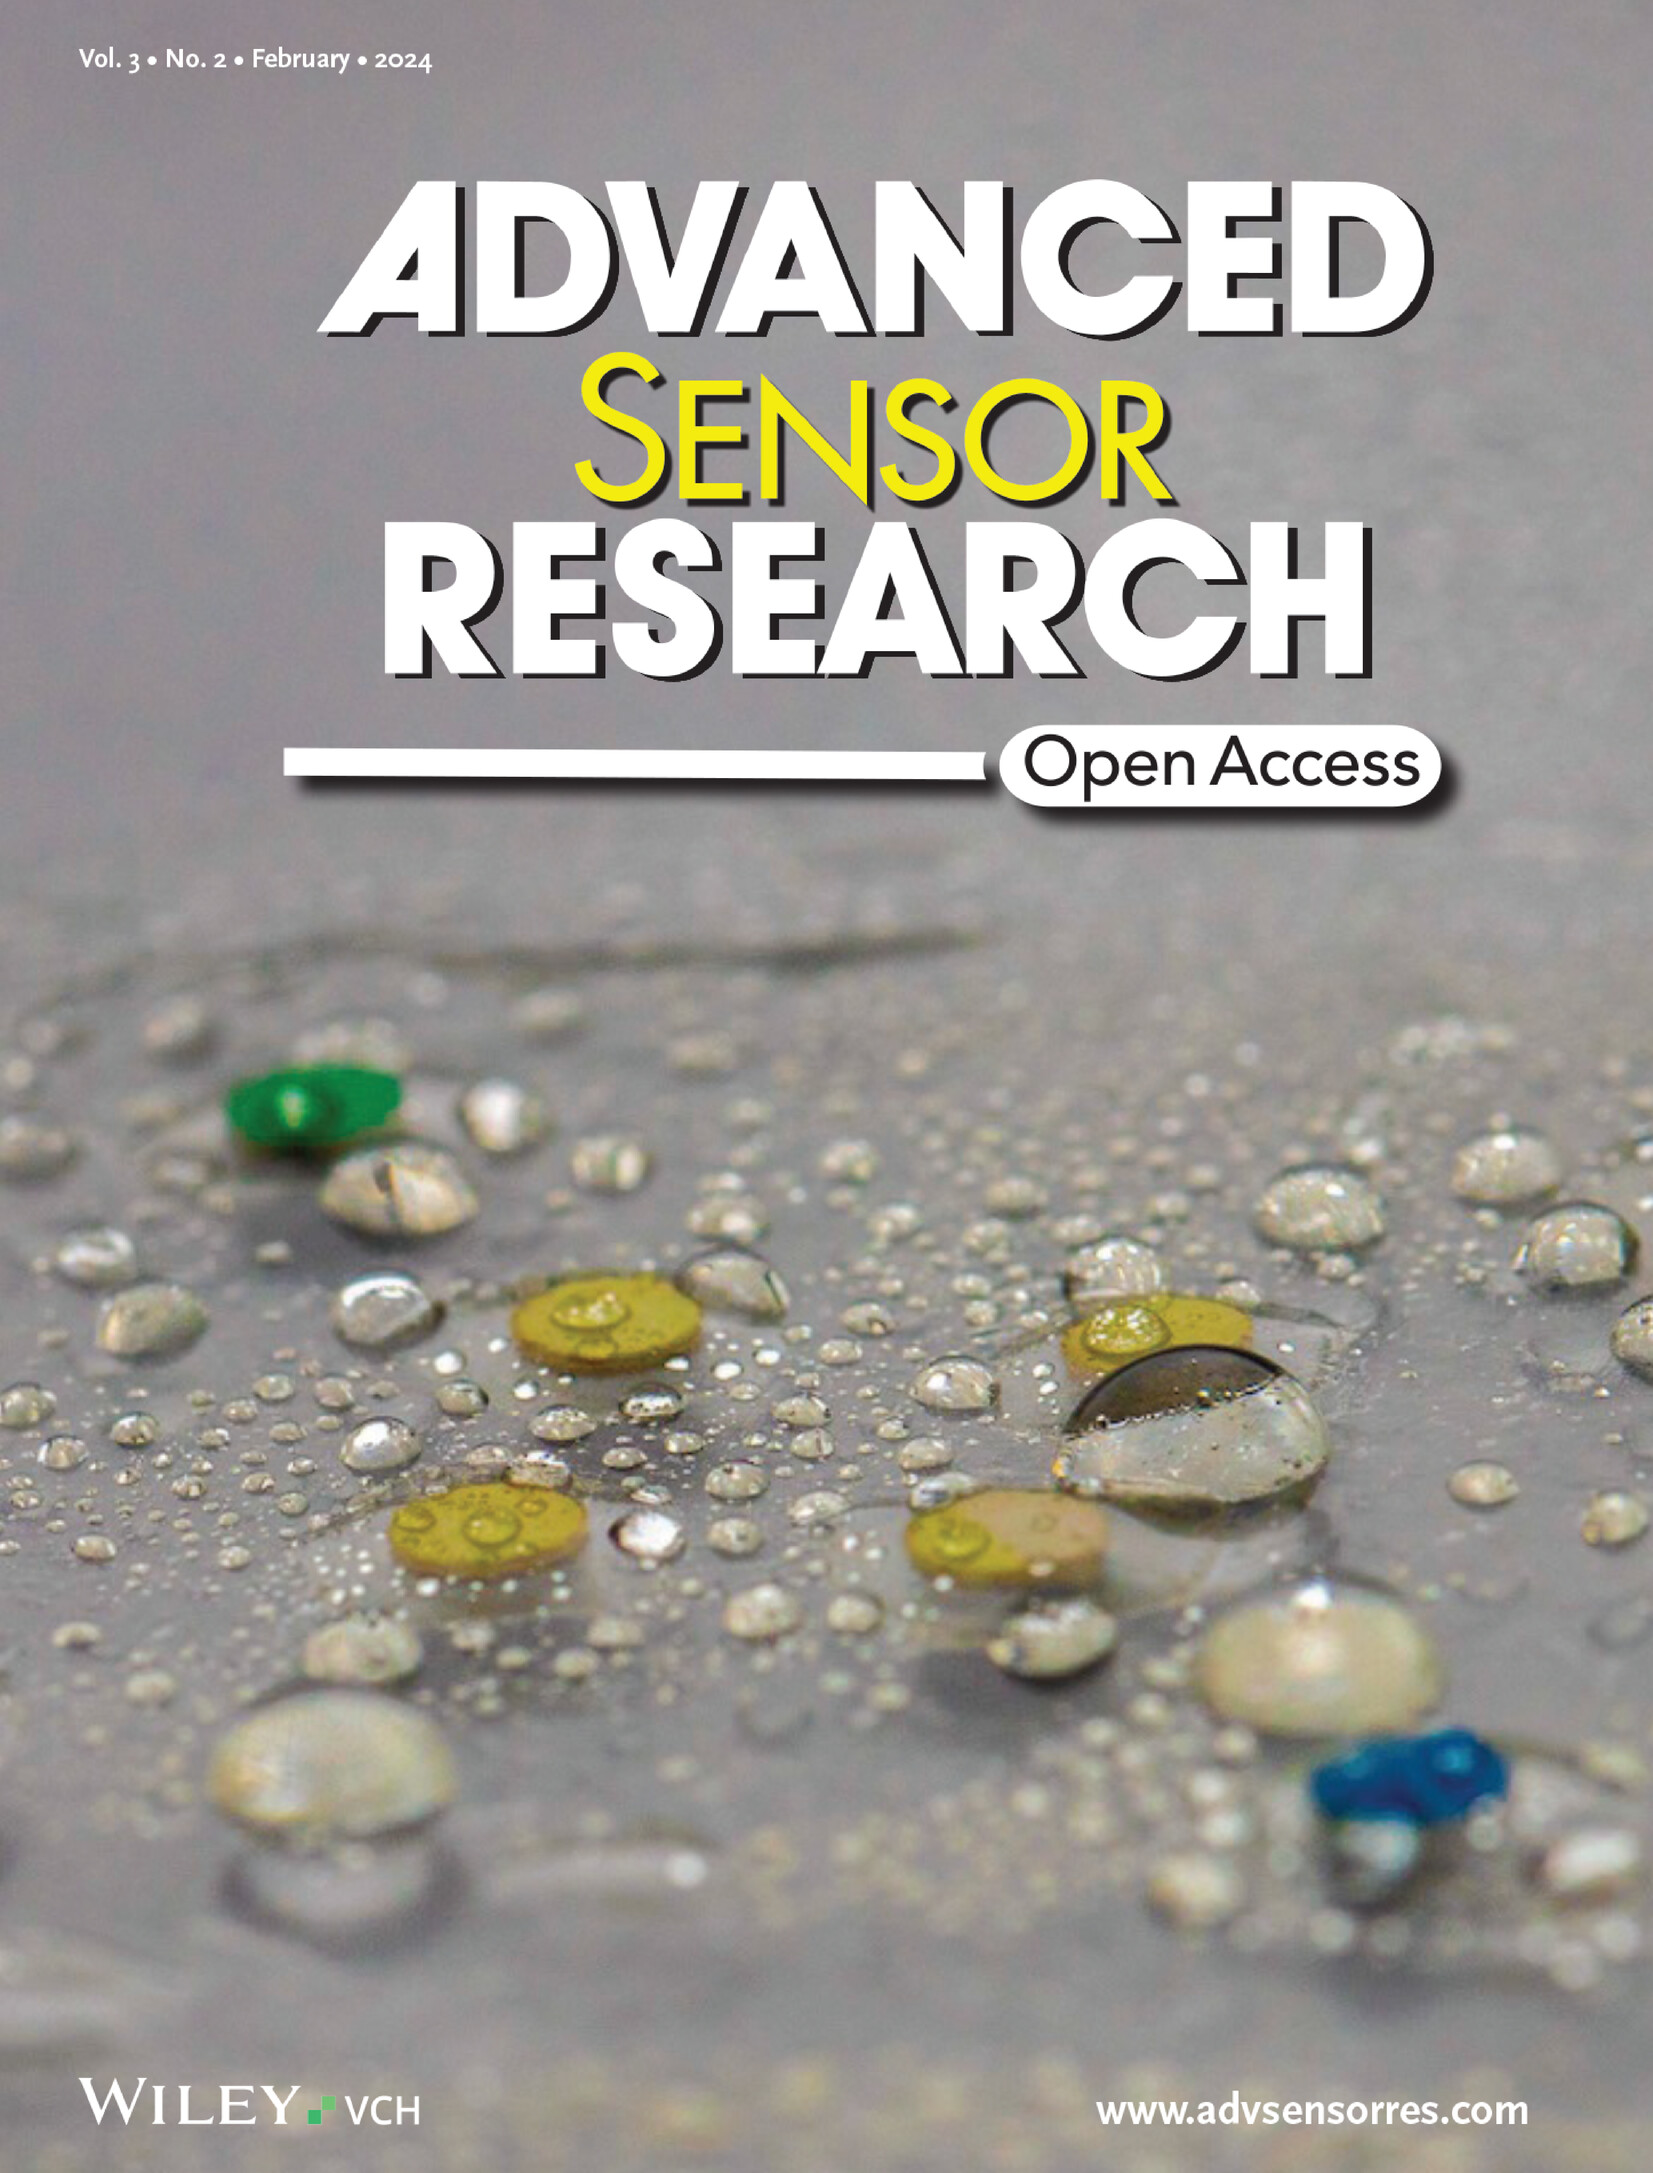 2023 Cover of Advanced Sensor Research, Volume 3, Issue 2